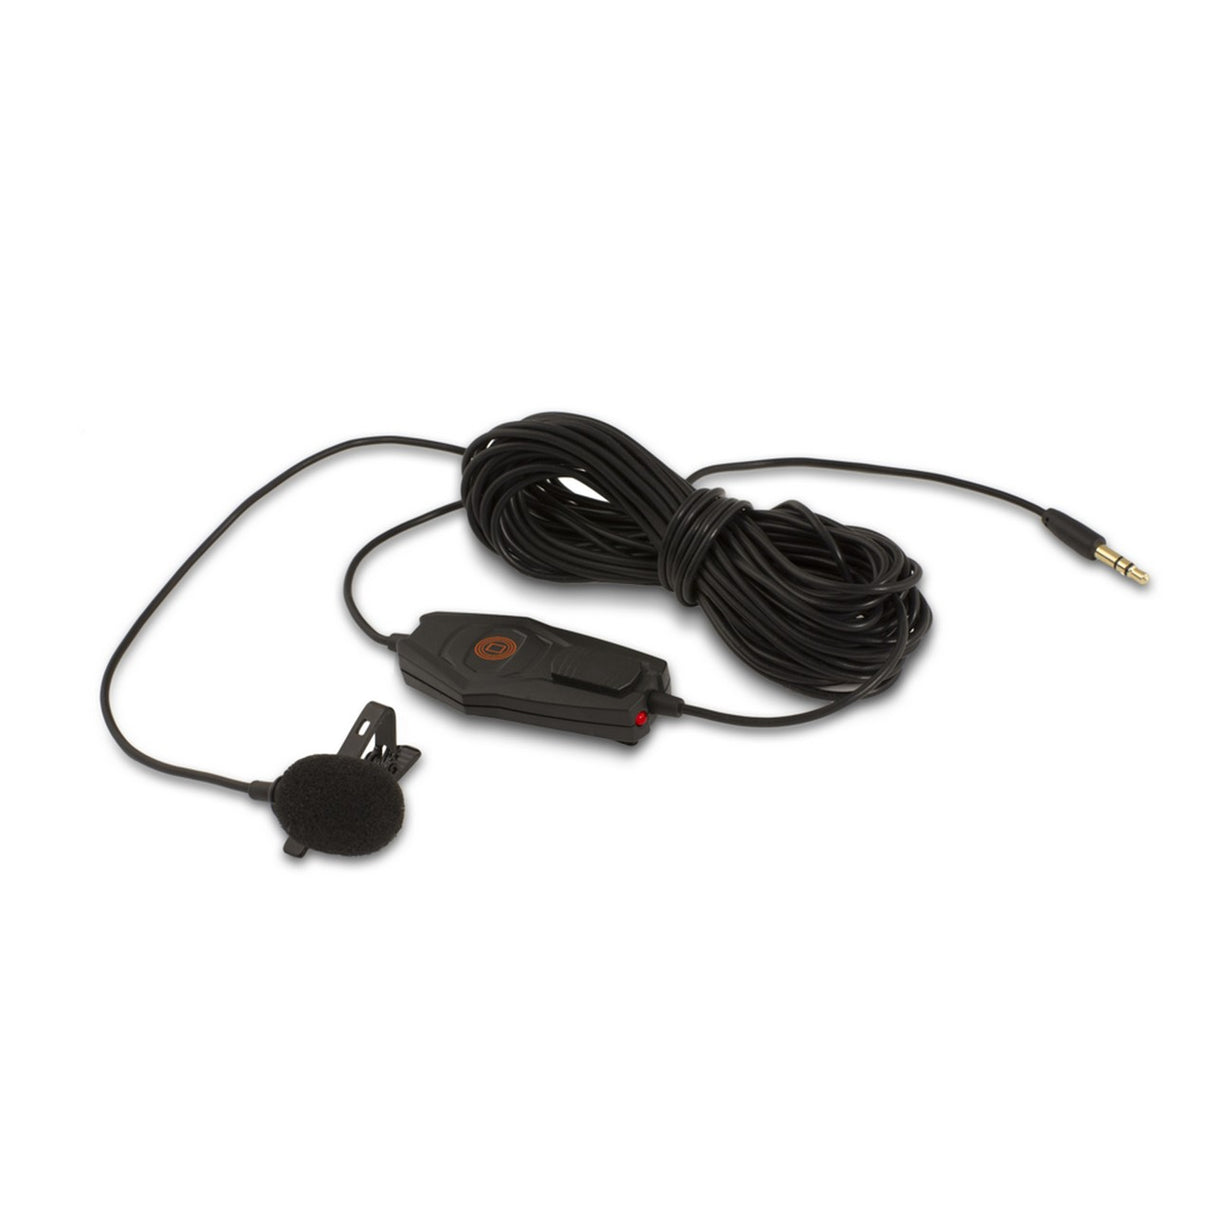 Padcaster Lavalier Microphone with Windscreen and Detachable Tie Clip